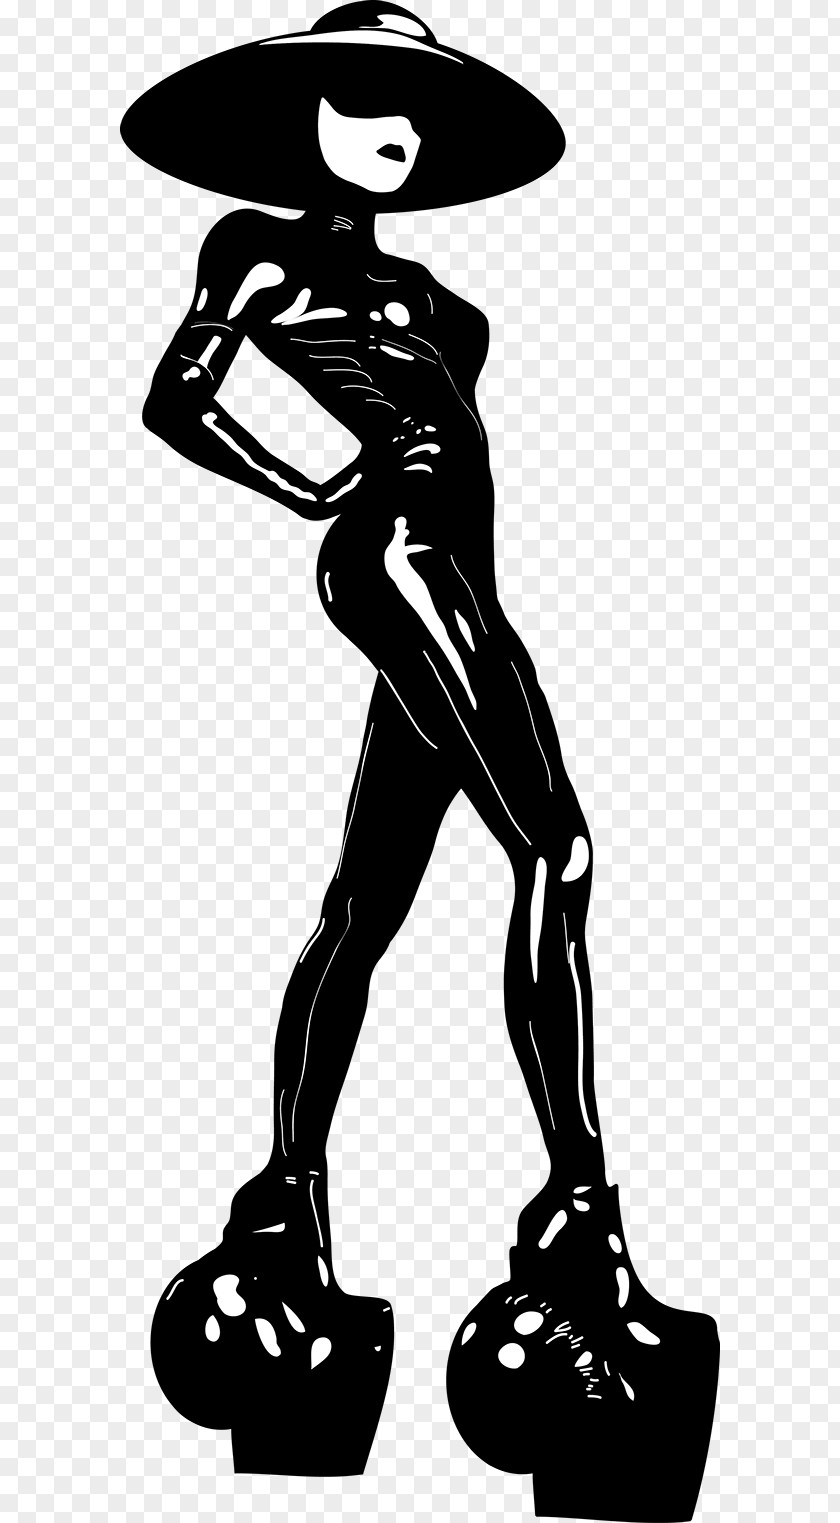 Ladies Vector Lady Gaga Fame The Born This Way PNG